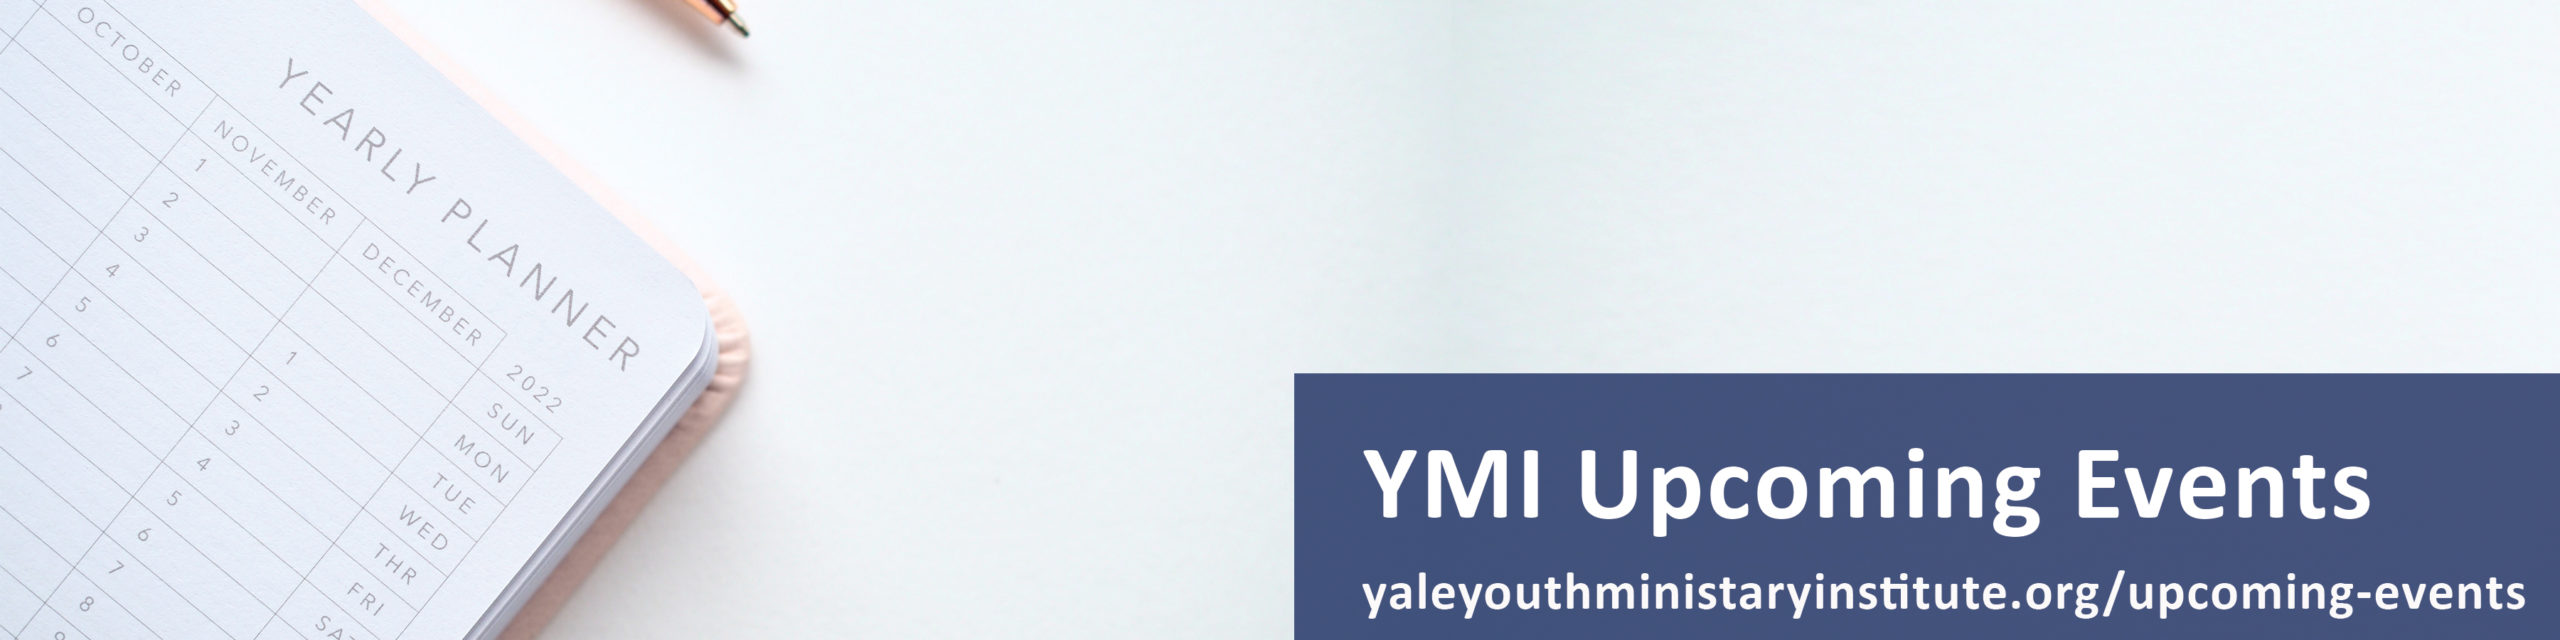 YMI Upcoming Events